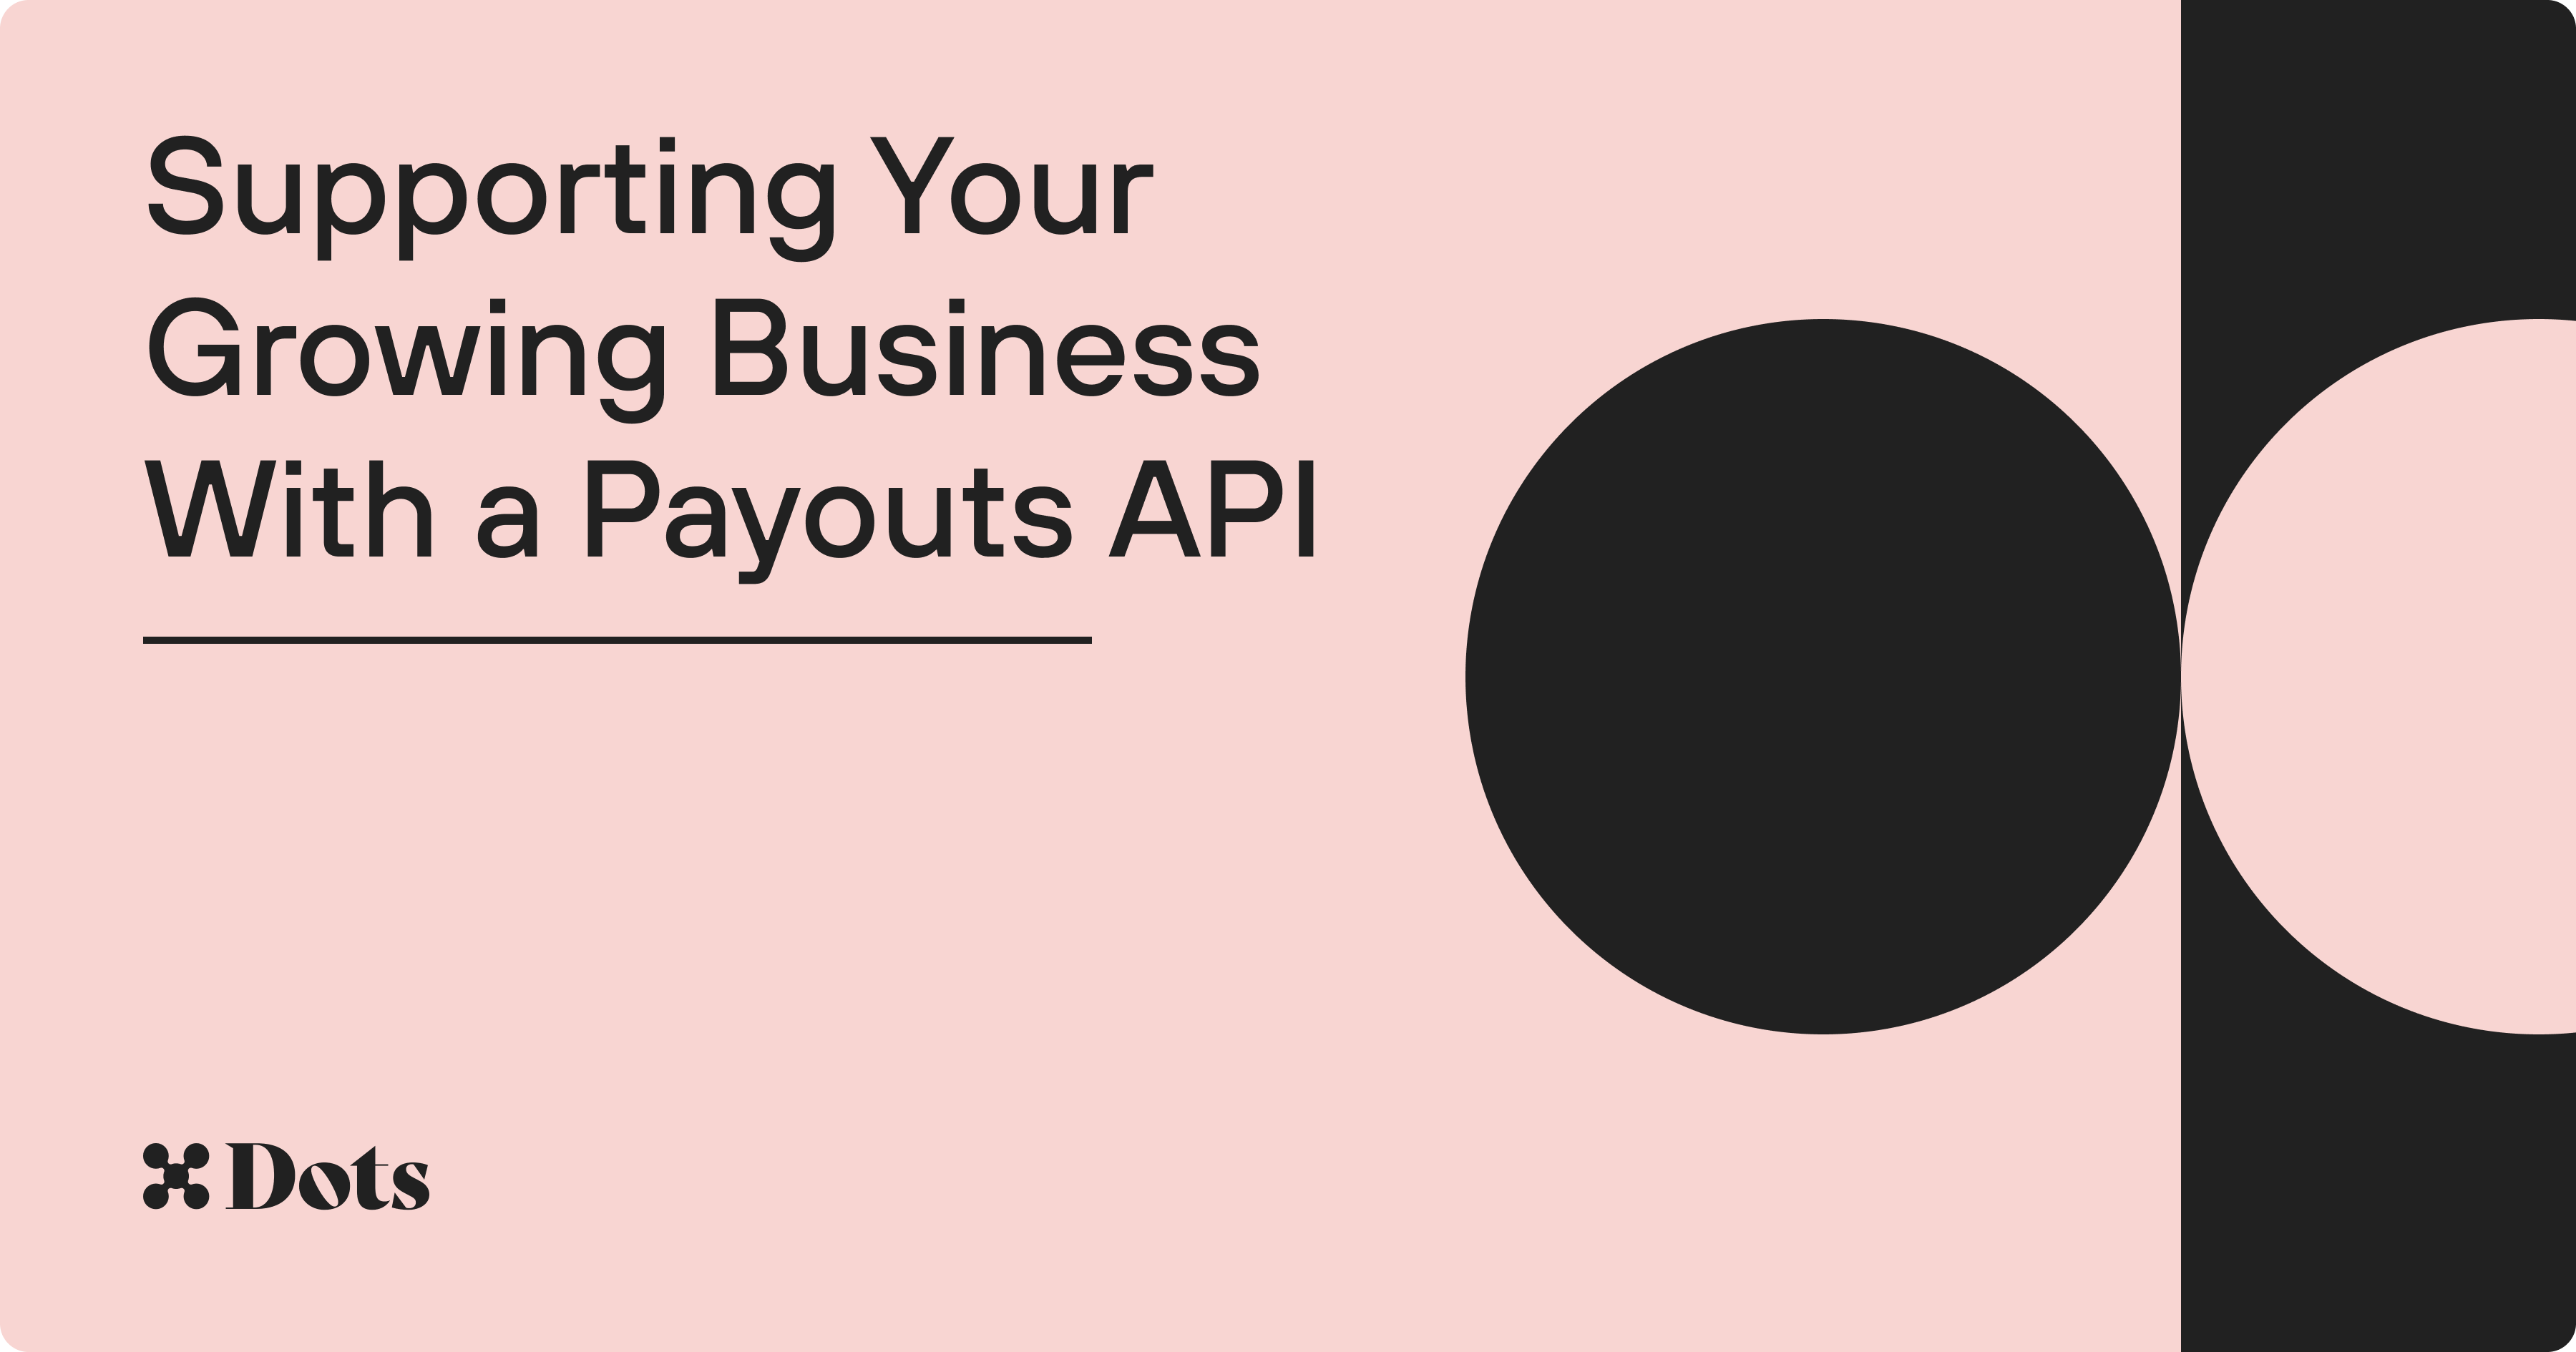 Supporting Your Growing Business With a Payouts API